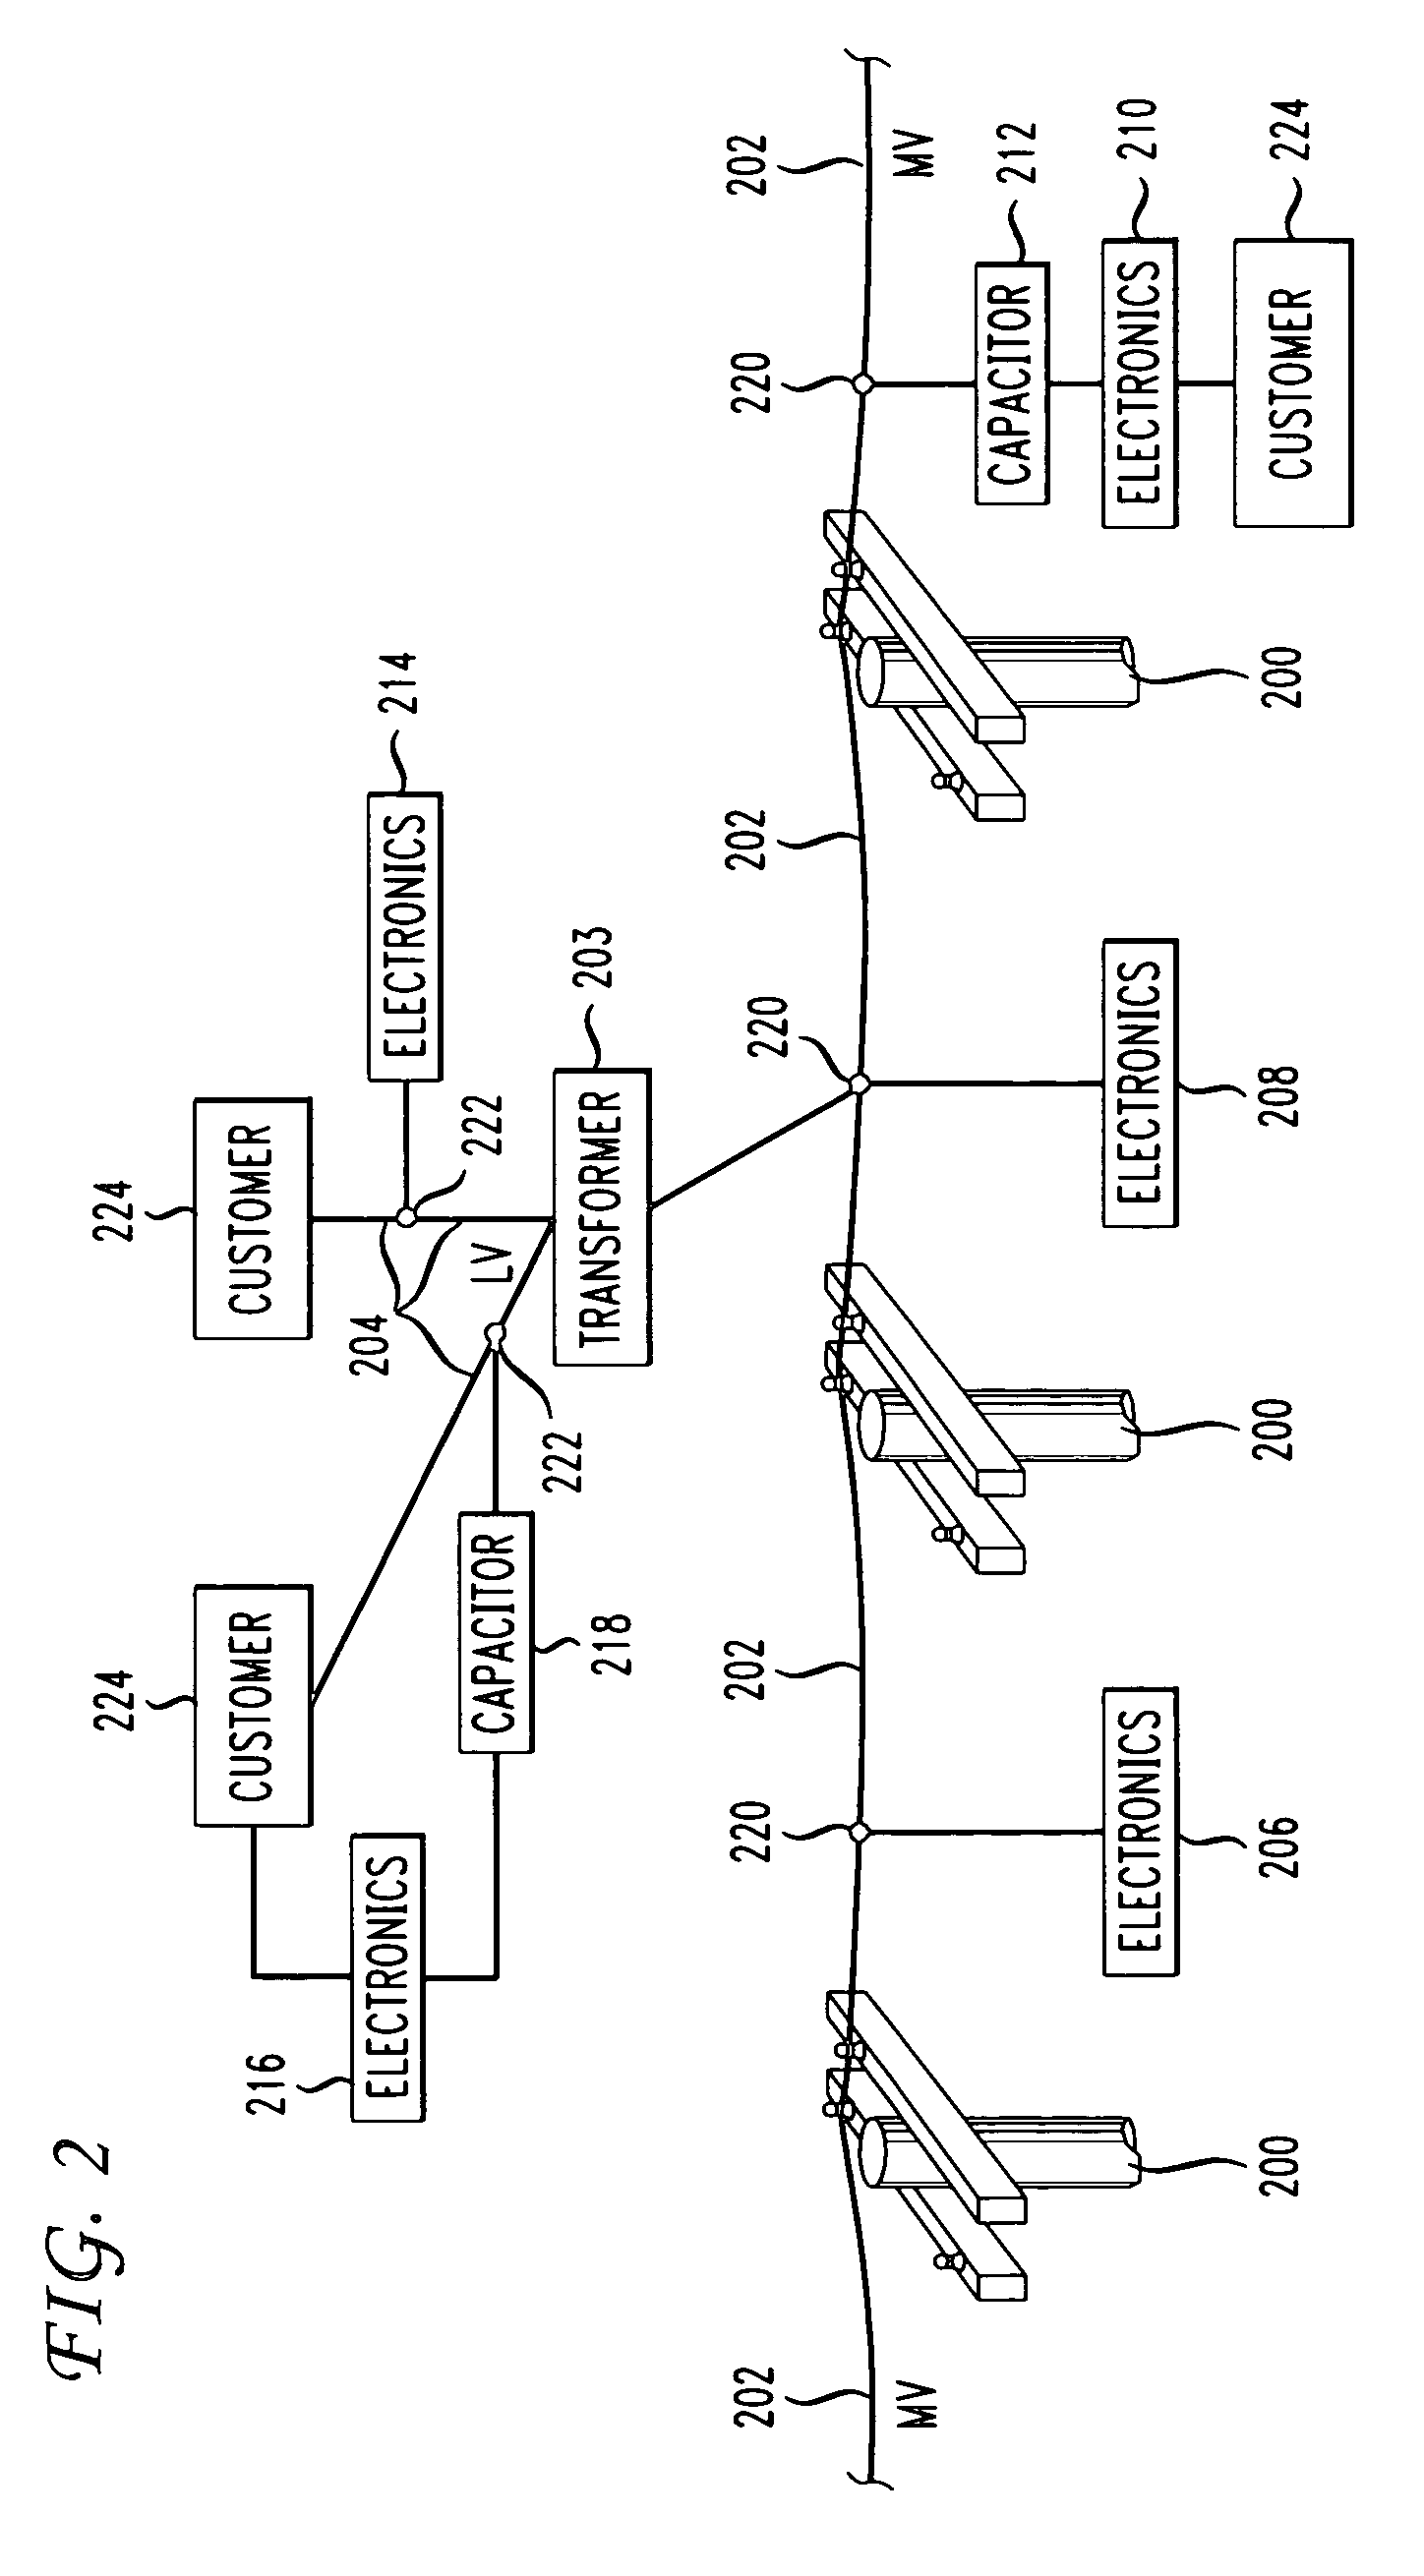 Broadband coupler technique for electrical connection to power lines